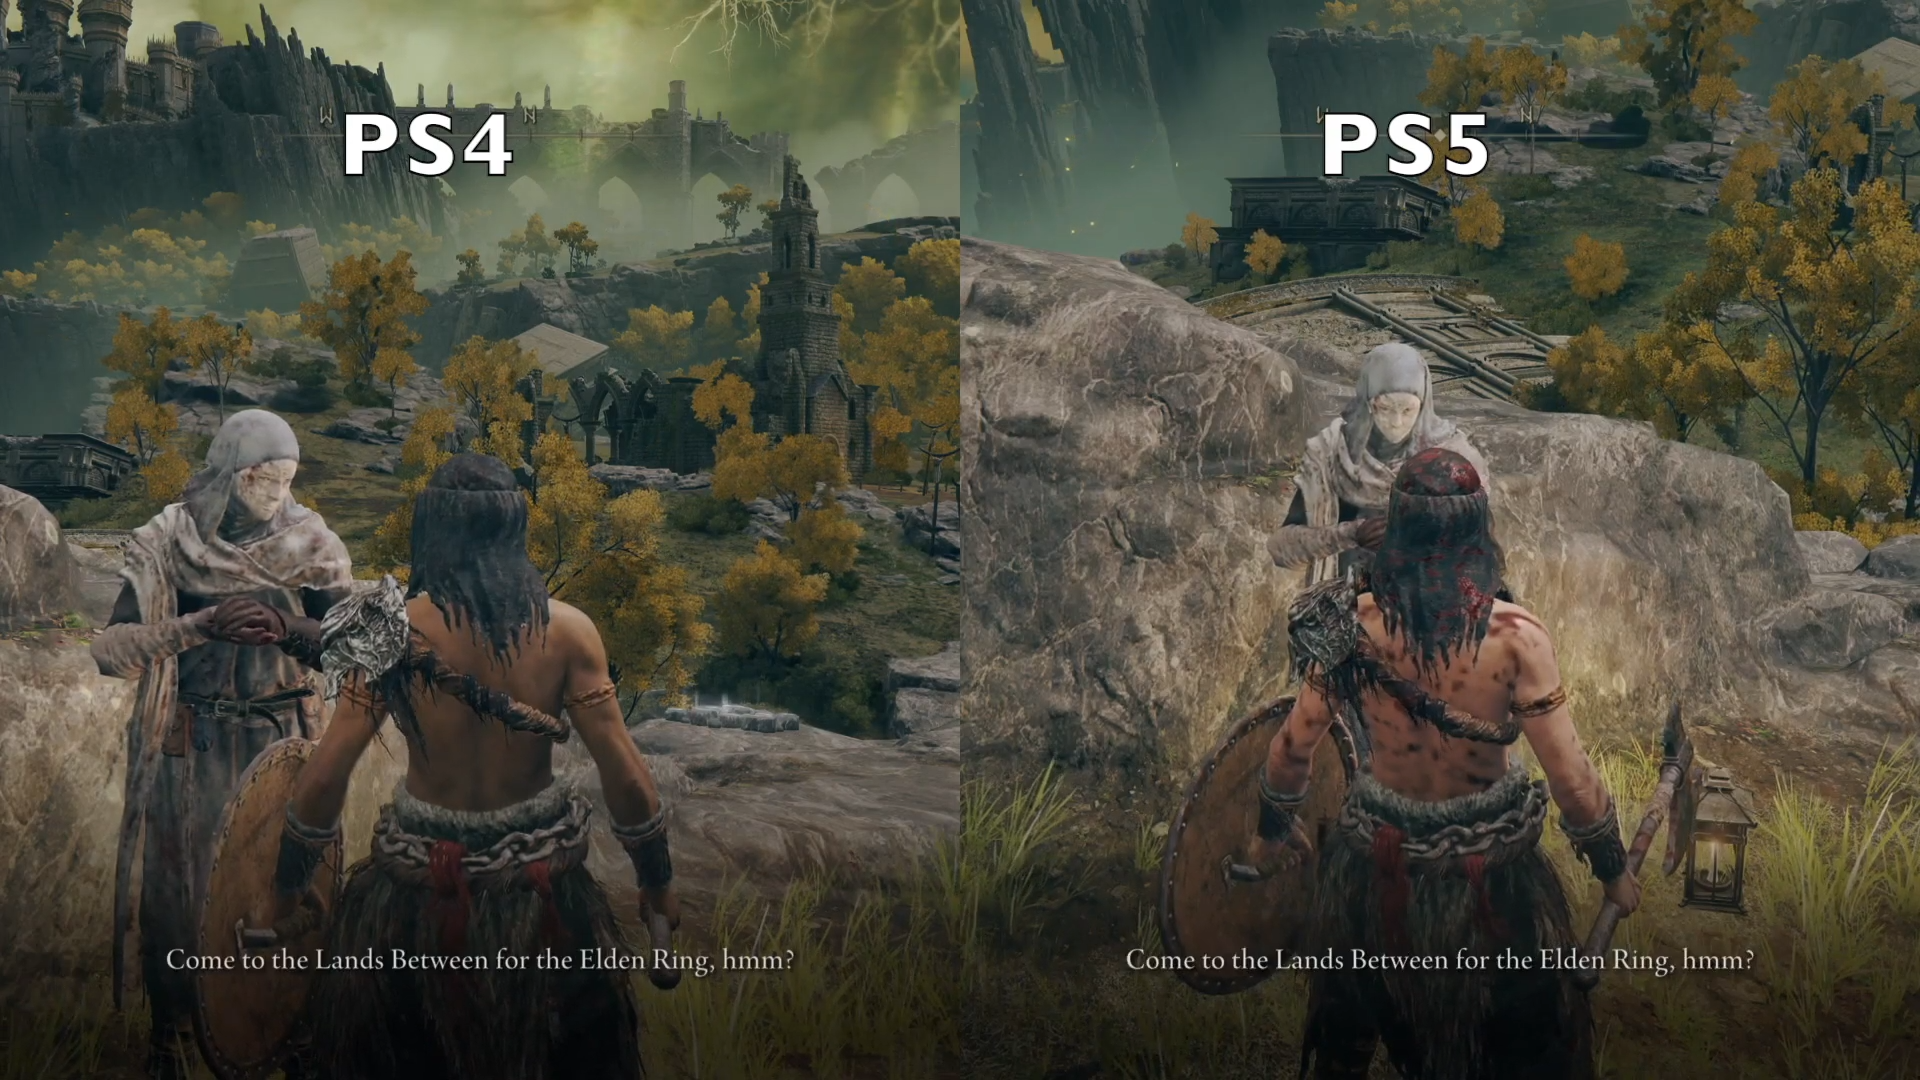 Elden Ring PS4 PS5 Comparison: You Sacrifice Performance For Visuals?